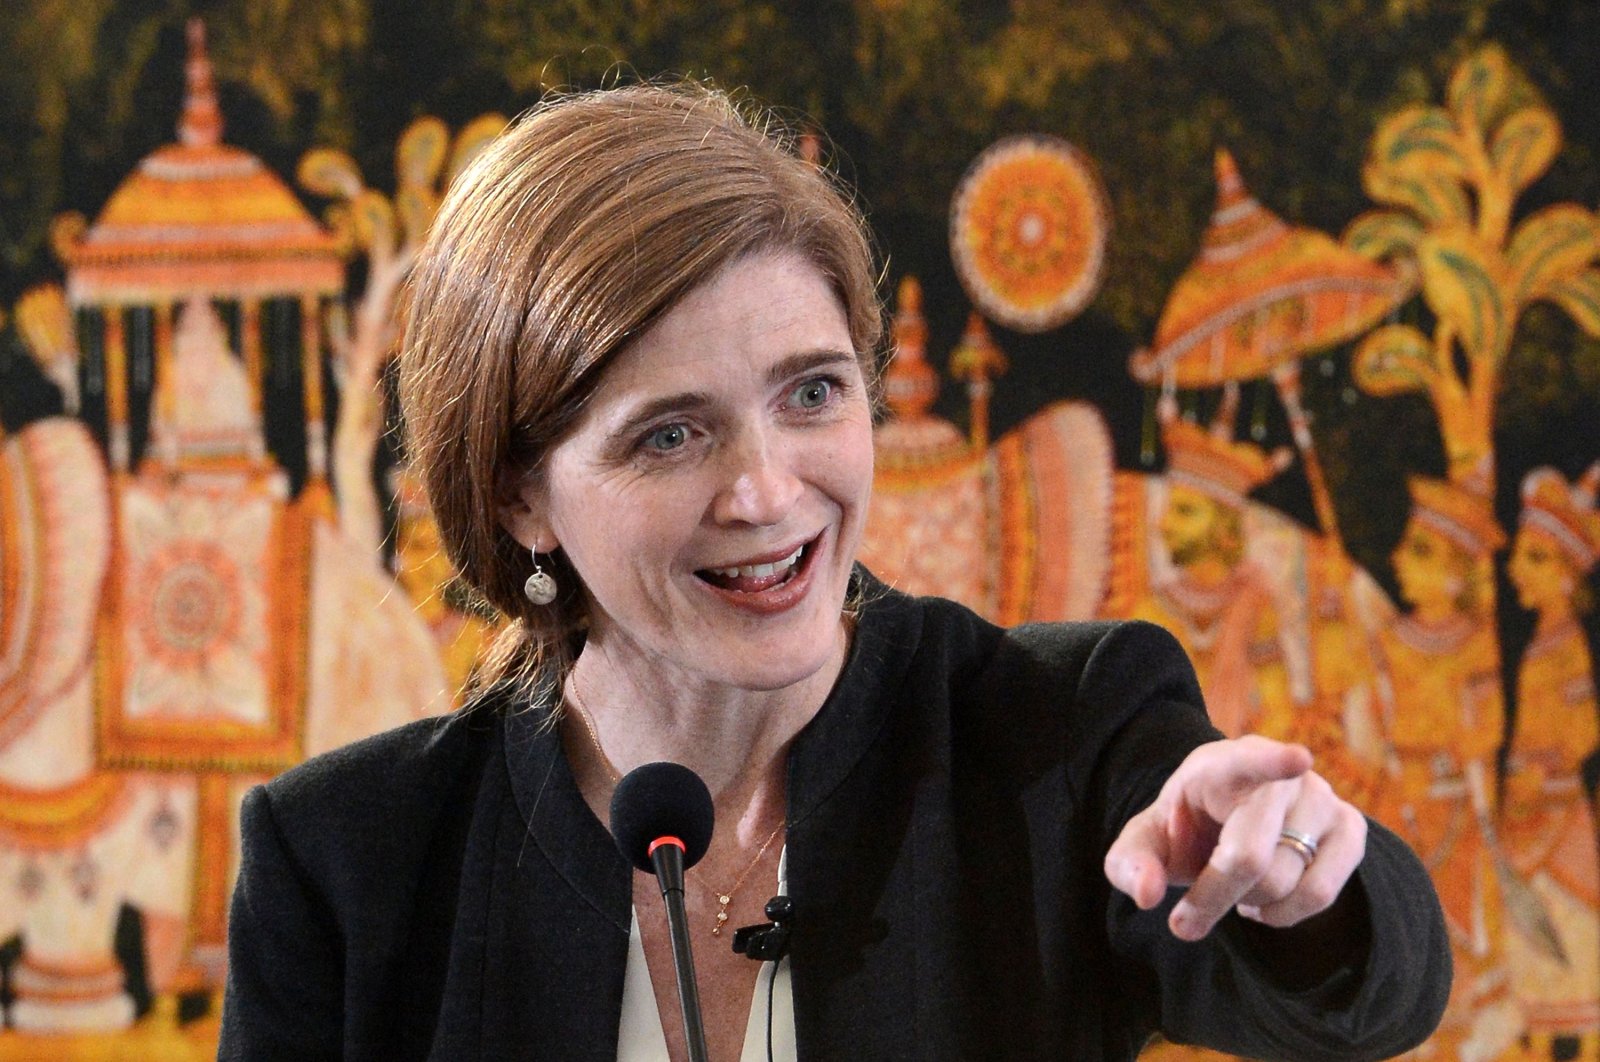 Former U.S. Ambassador to the United Nations Samantha Power speaks during a discussion with Sri Lankan youth in Colombo on Nov. 23, 2015. (AFP Photo)